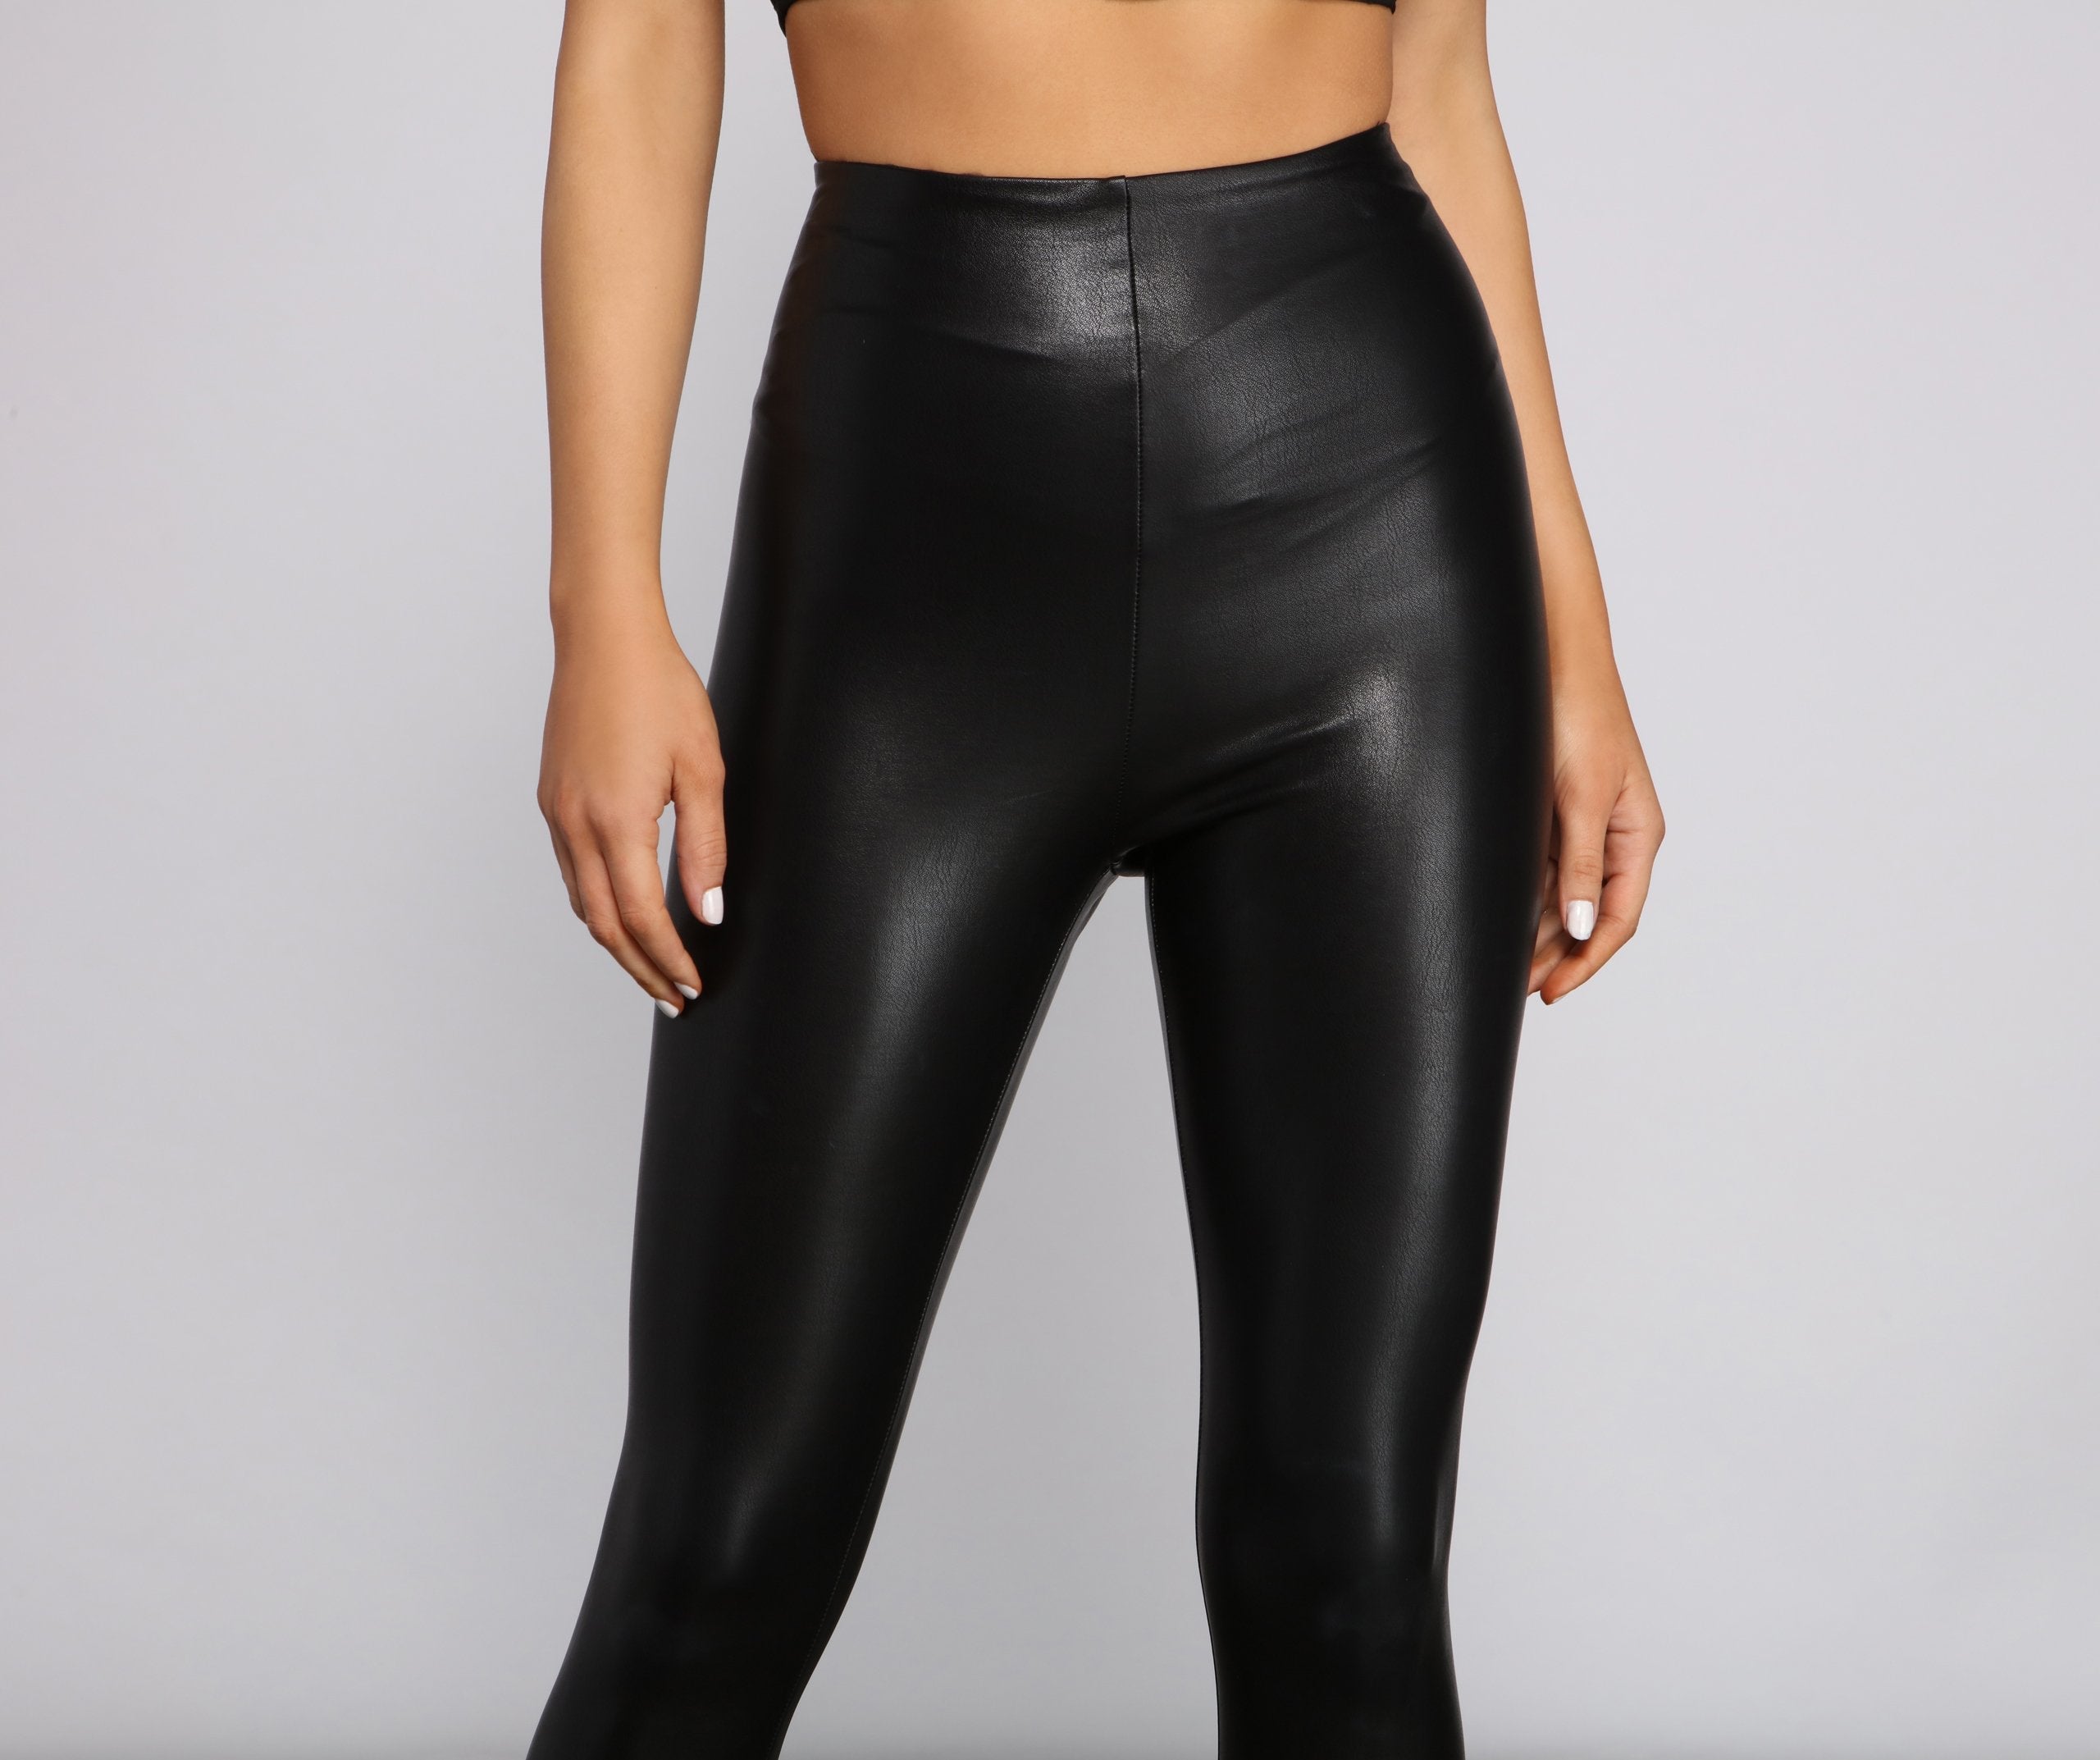 High Waist Faux Leather Leggings - Lady Occasions